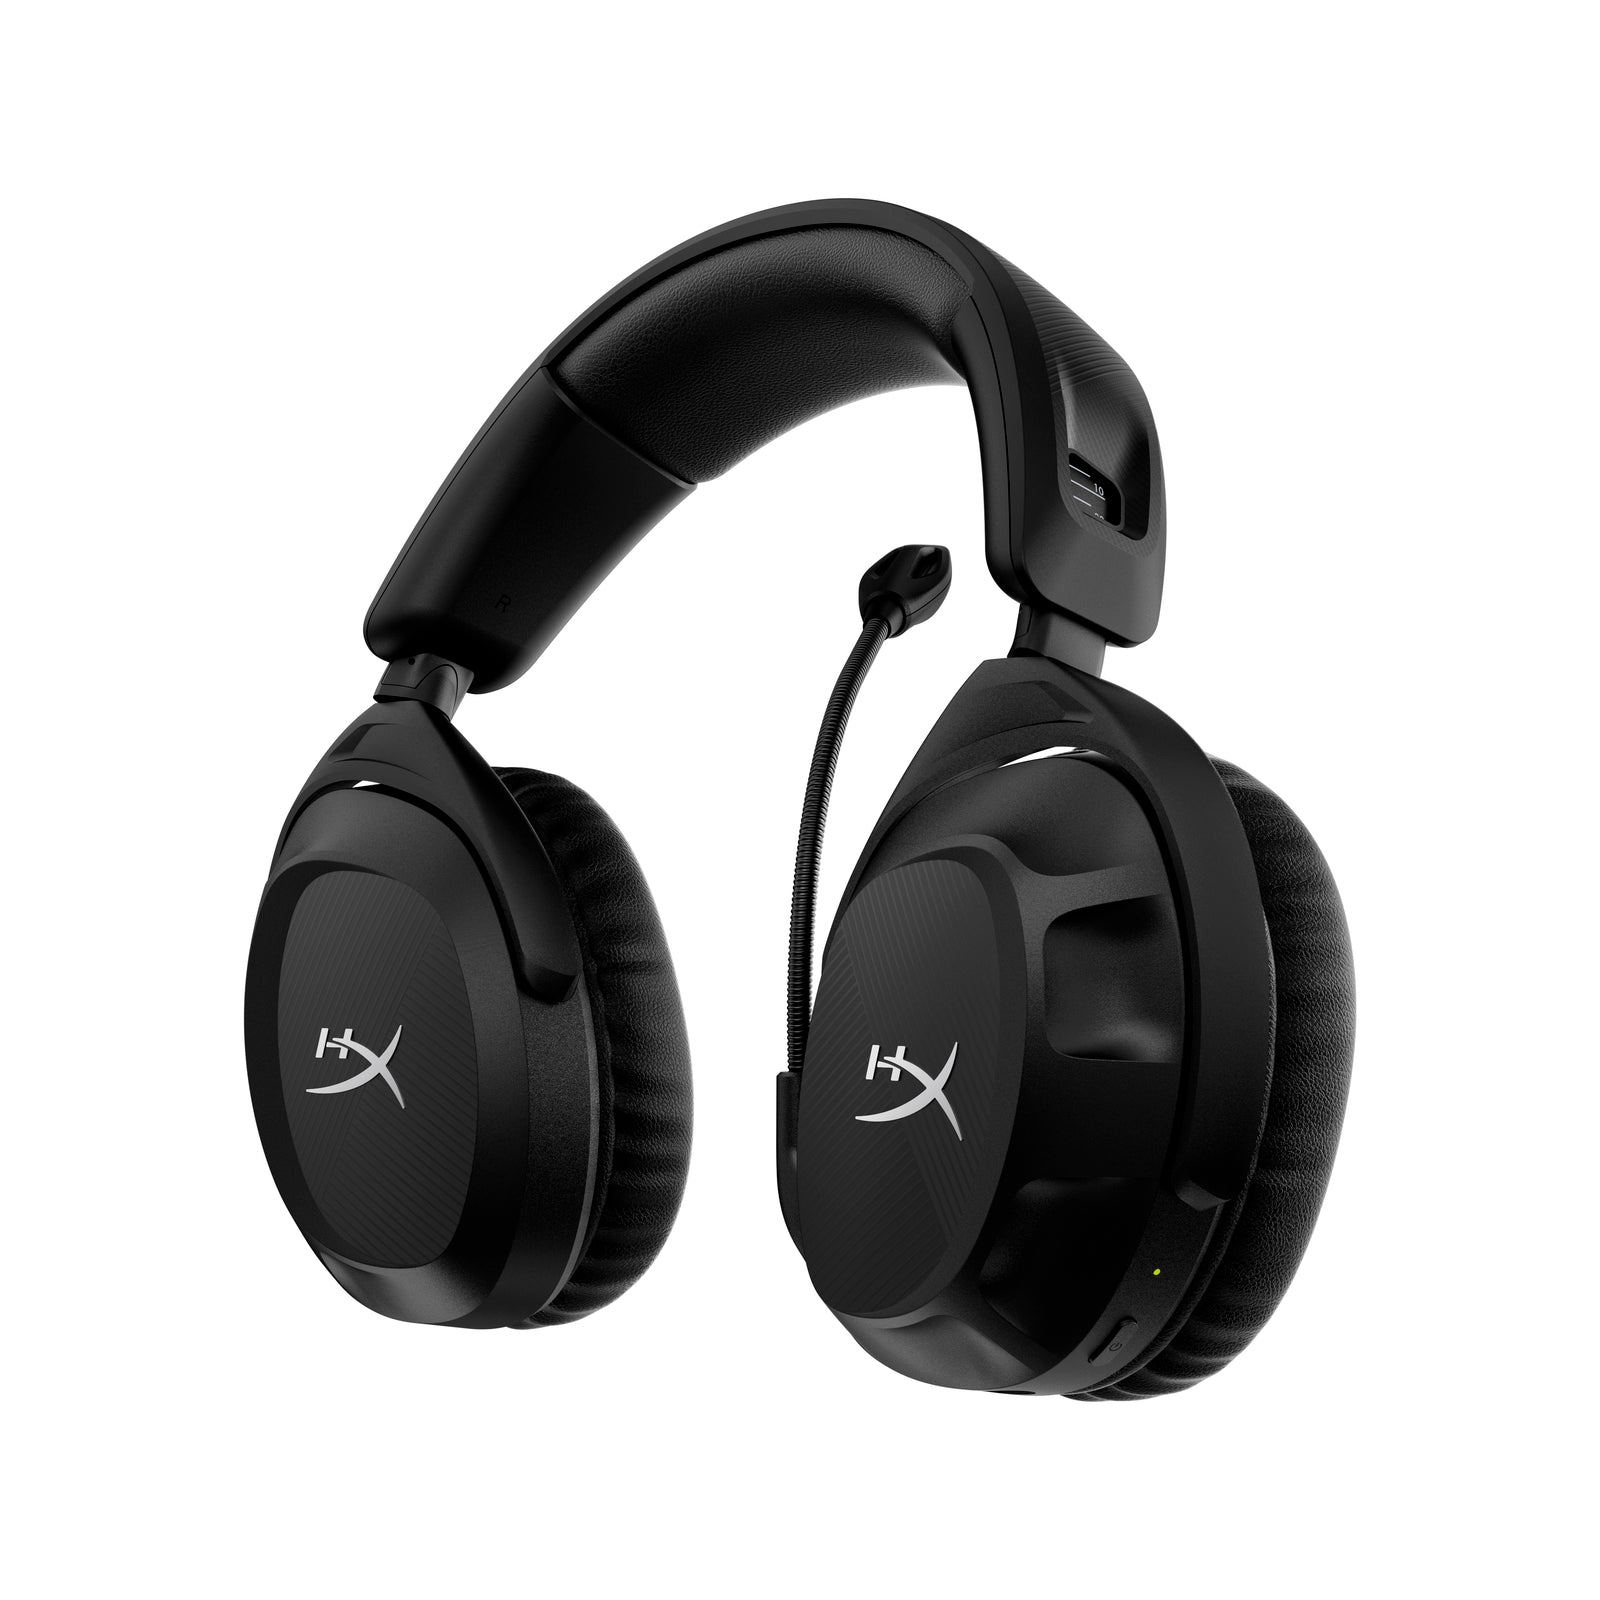 HyperX Cloud Stinger 2 Wireless Gaming Headset Showing Rotated Earcups